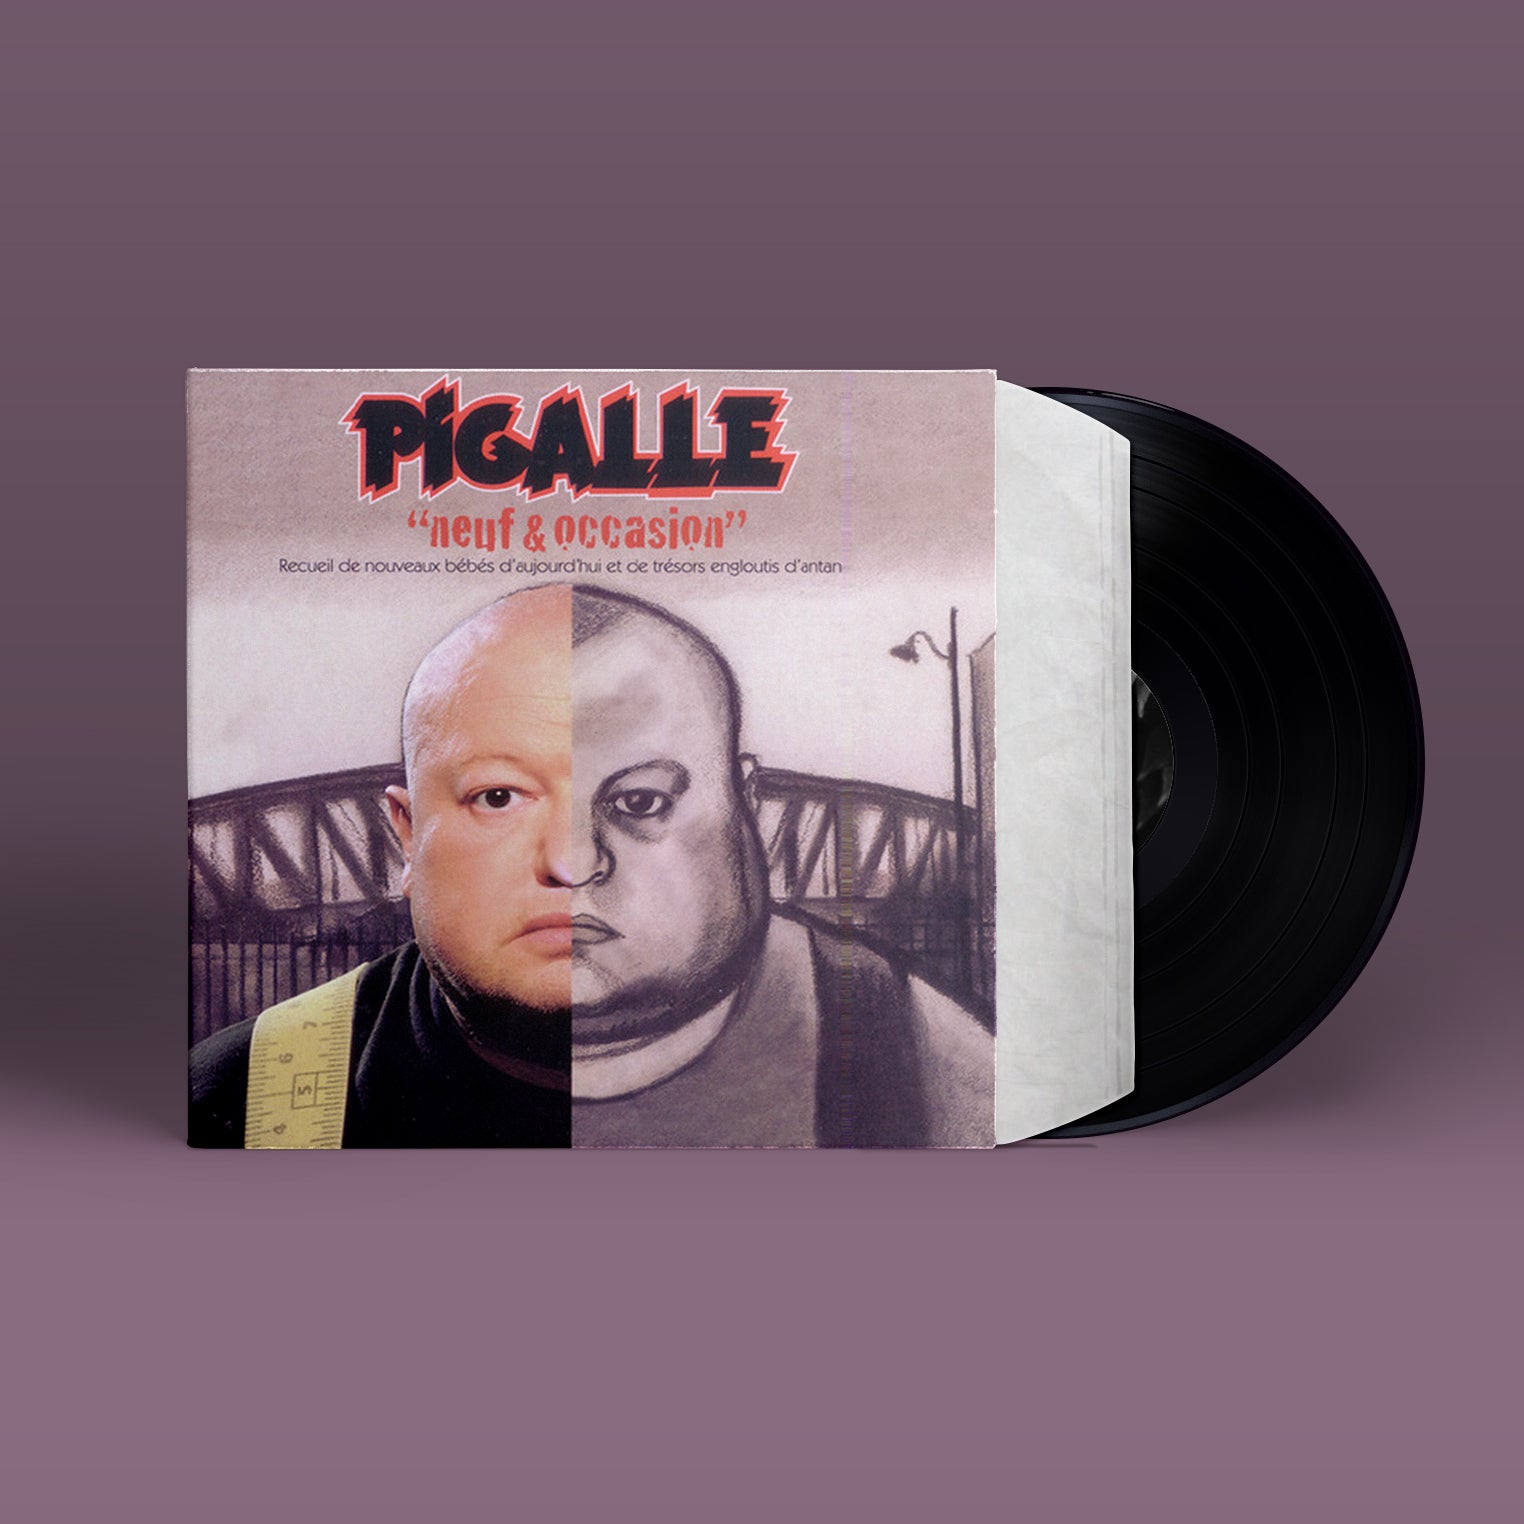 Pigalle - Neuf & occasion